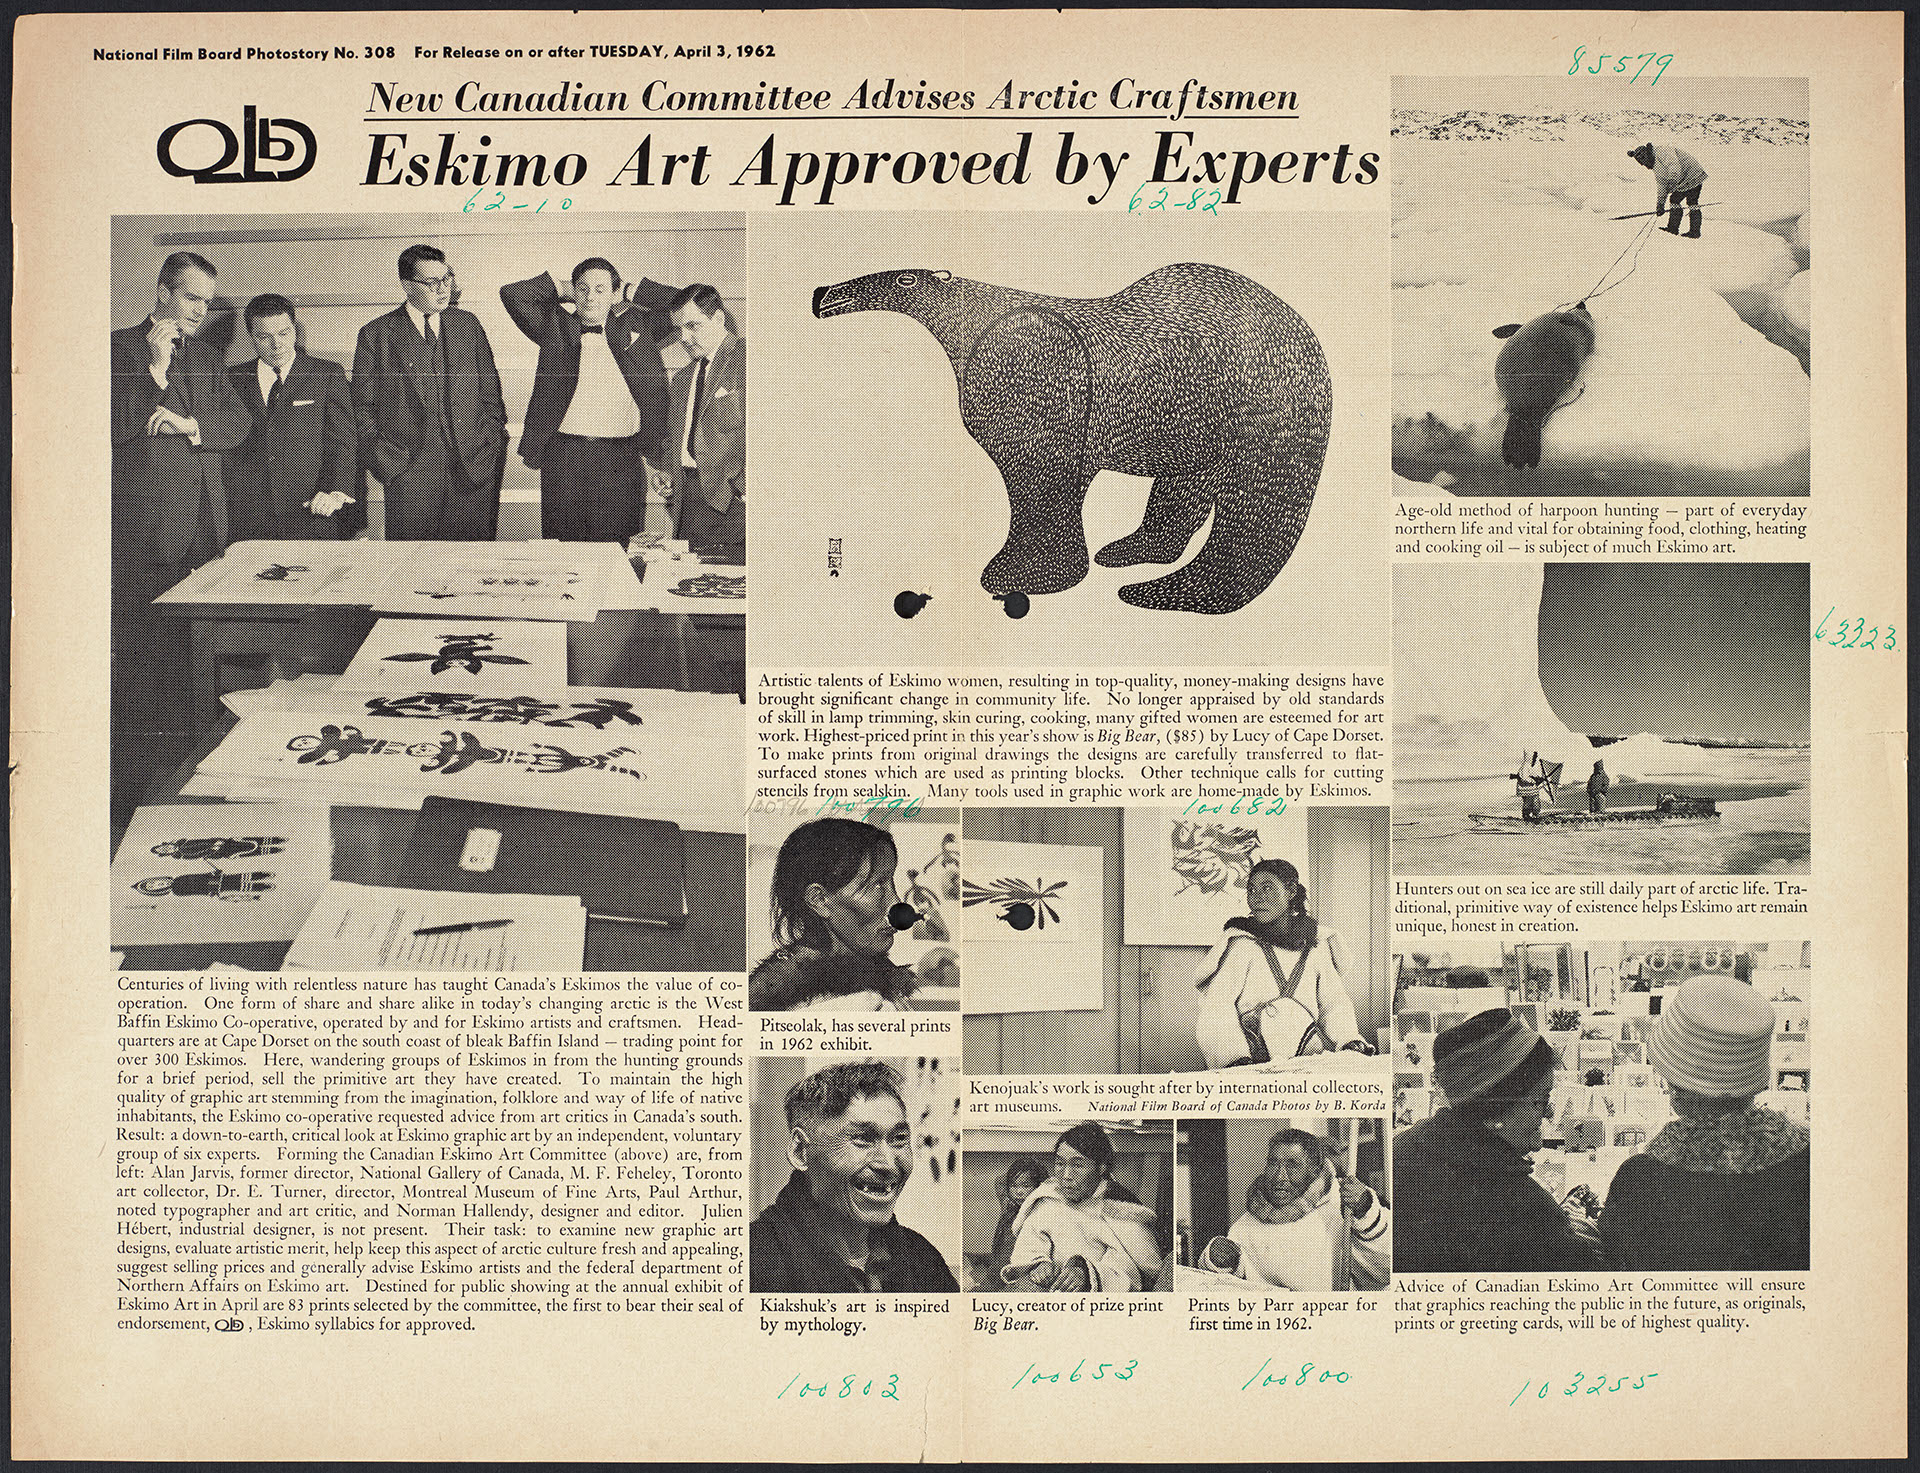 Photograph of a yellowed newspaper article with photographs, describing the West Baffin Eskimo Co-operative, its background, and its objectives, as well as a group of white male advisors from Southern Ontario. In the center is a photo of Big Bear by Lucy of Cape Dorset, who is pictured below it. Also pictured are four other Inuit artists: Pitseolak, Kiakshuk, Kenojuak, and Parr; and arctic hunting scenes.